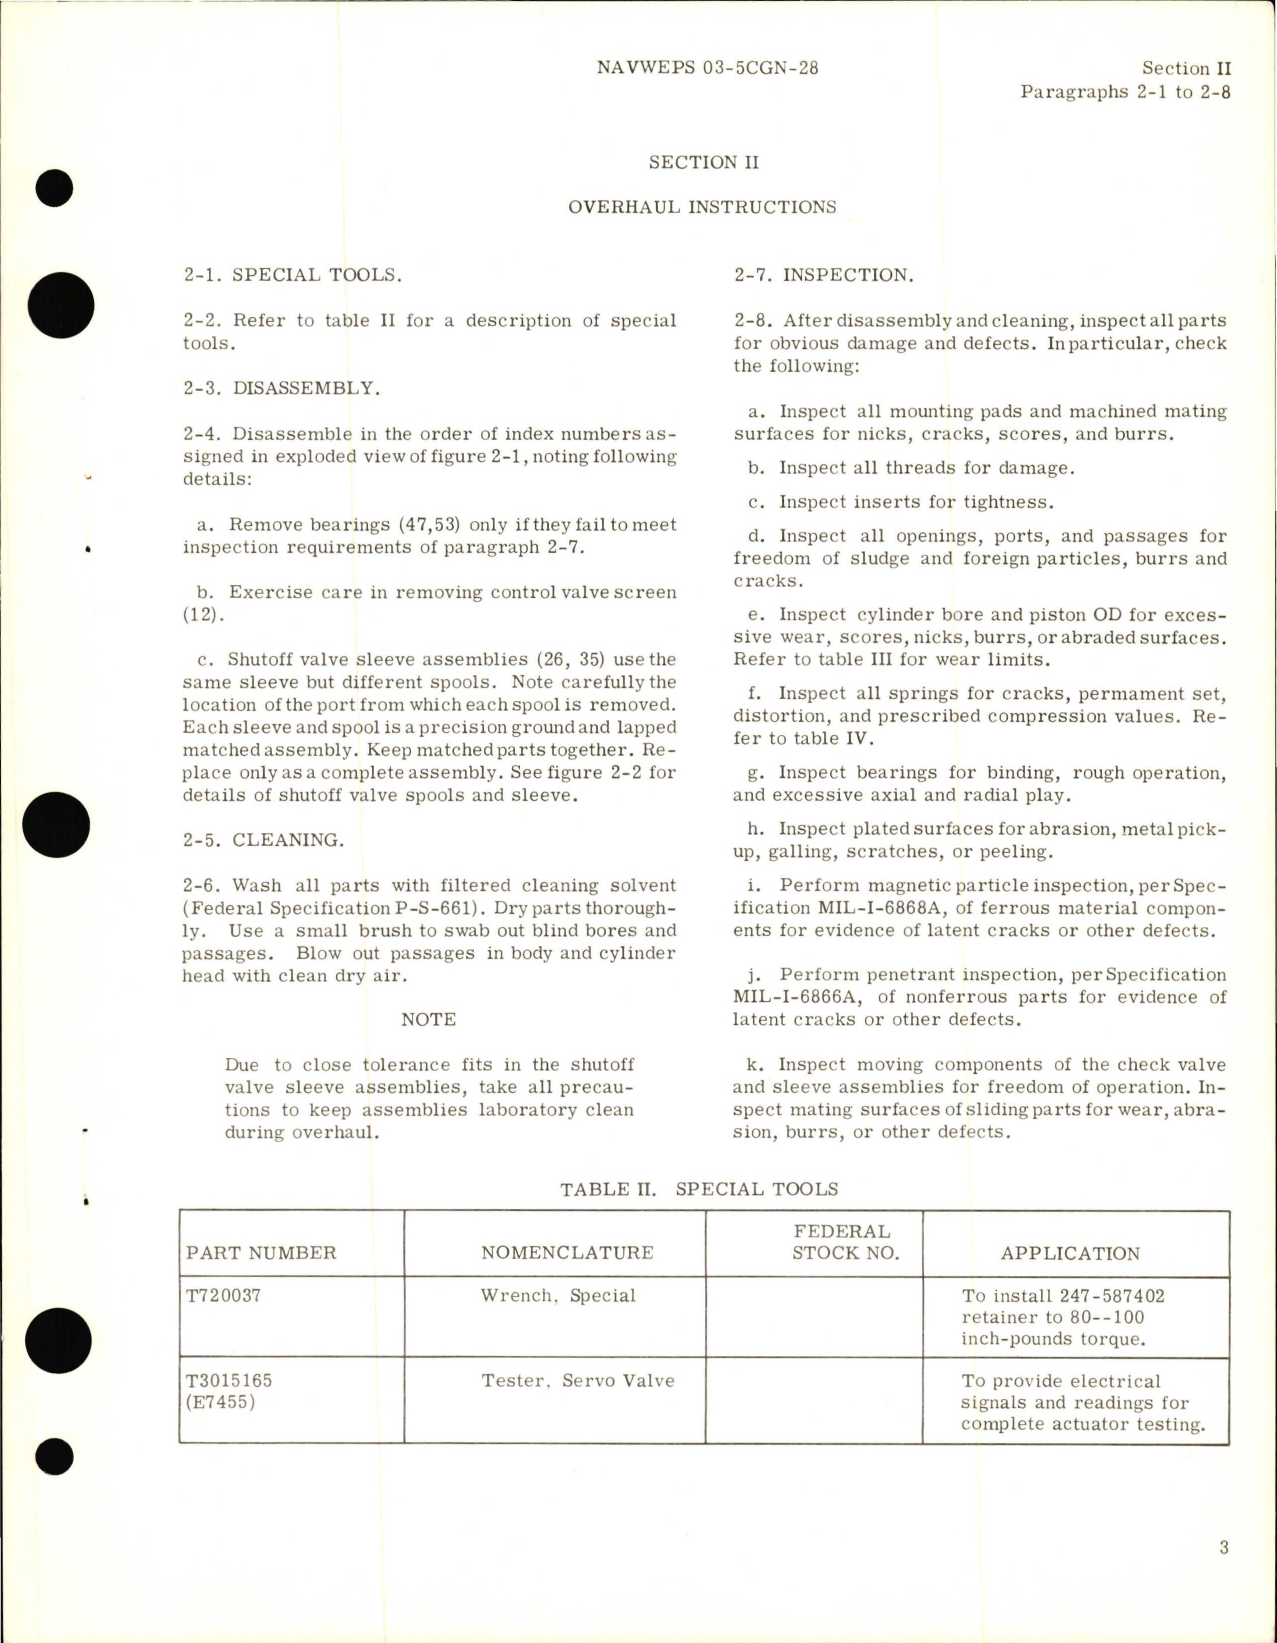 Sample page 5 from AirCorps Library document: Overhaul Instructions for Hydraulic Inlet Ramp Servo Actuator Assembly - Part 247-58712-11 and 247-58712-12 